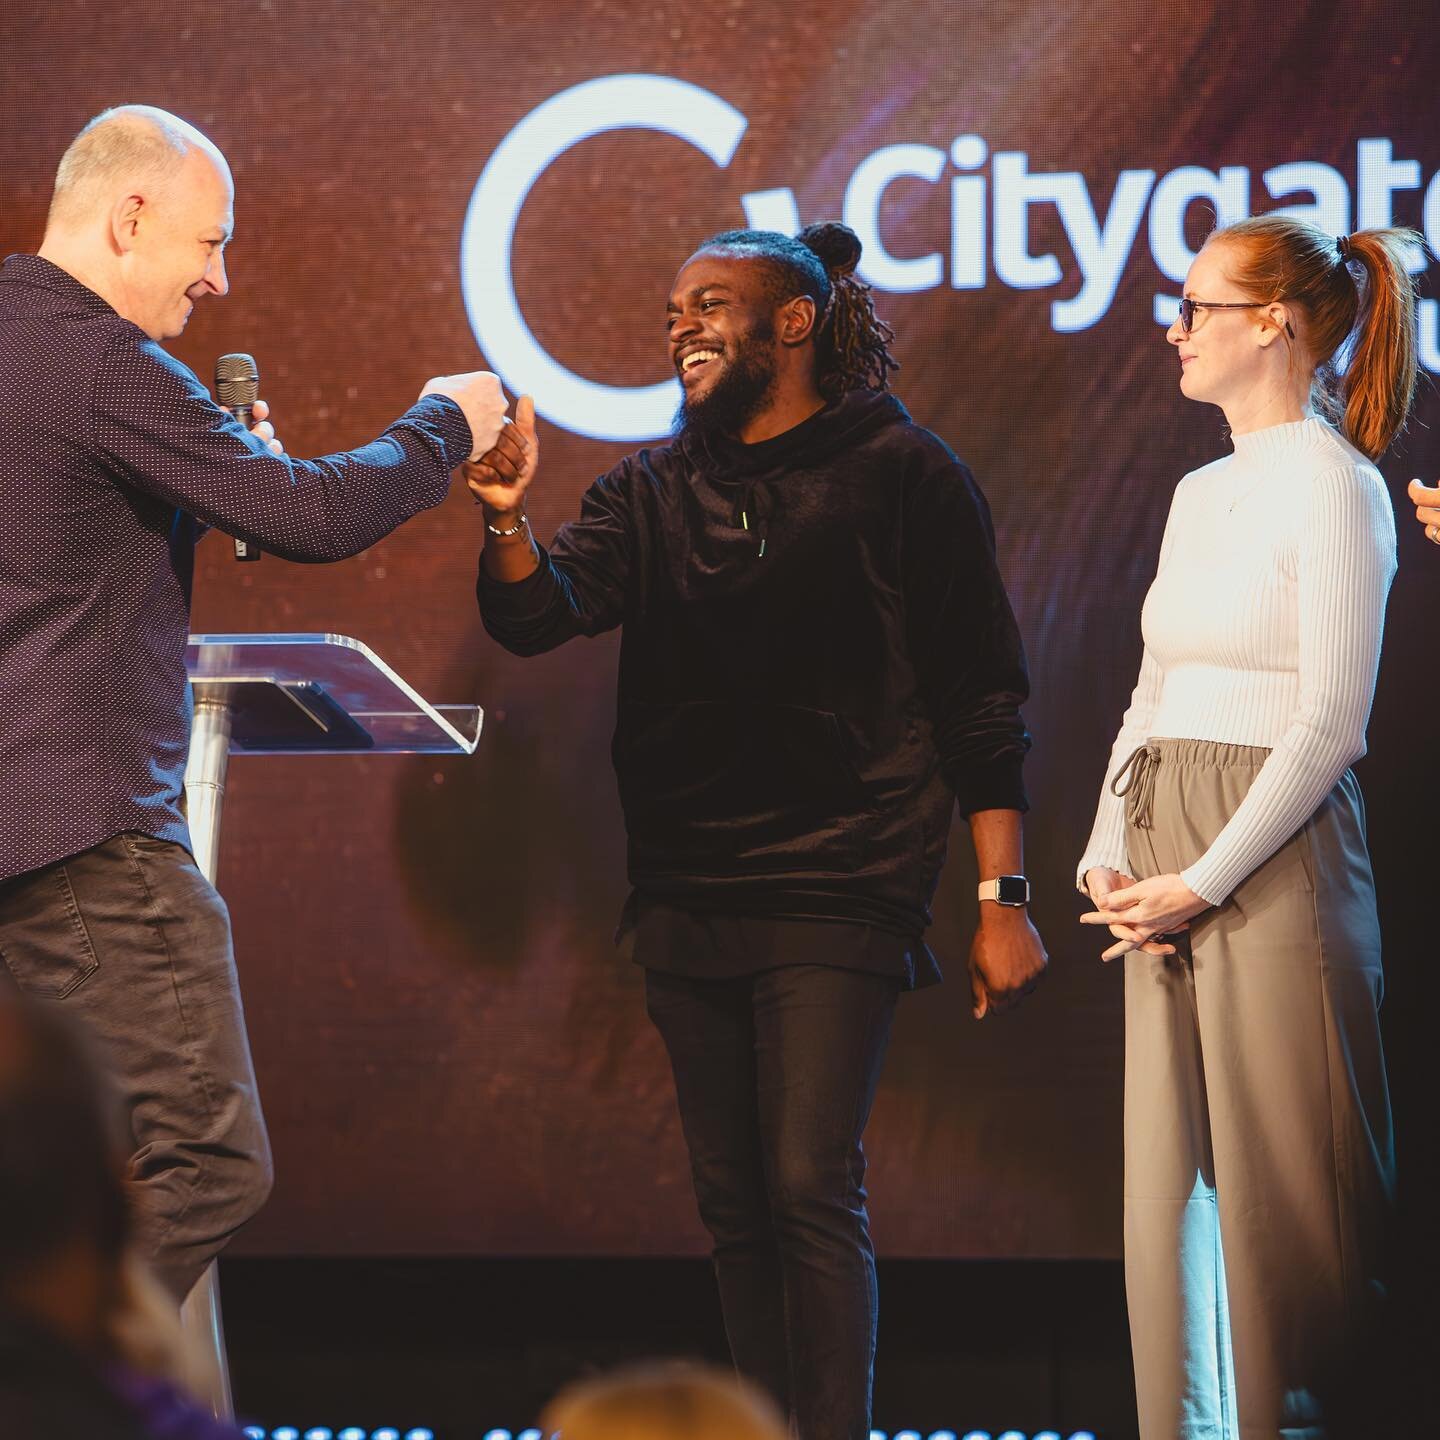 Meet Jess and Leonard, our new @citygateyouth Pastors AND Tim and Sisi, stepping up as Pastors to @citygateyoungadults. 🙌

Last Sunday we prayed them in as they take on these new roles. Great days are ahead with their heart for people, for the local